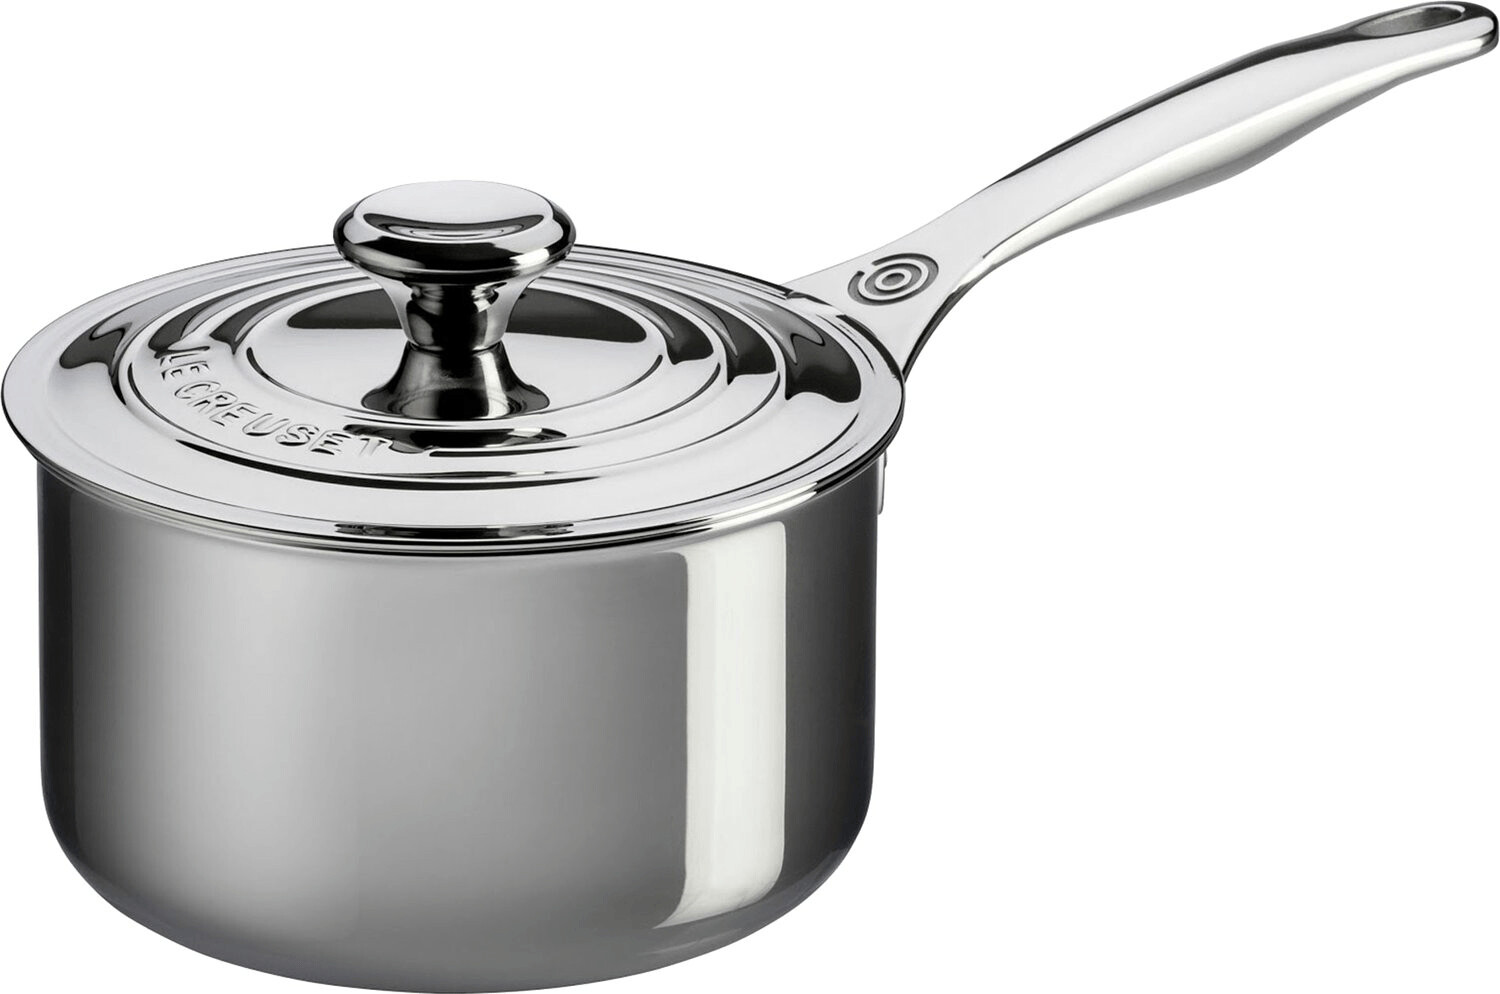 Le Creuset Le Creuset Tri-Ply Stainless Steel Saucepan with Lid and Helper Handle, 4-Quart